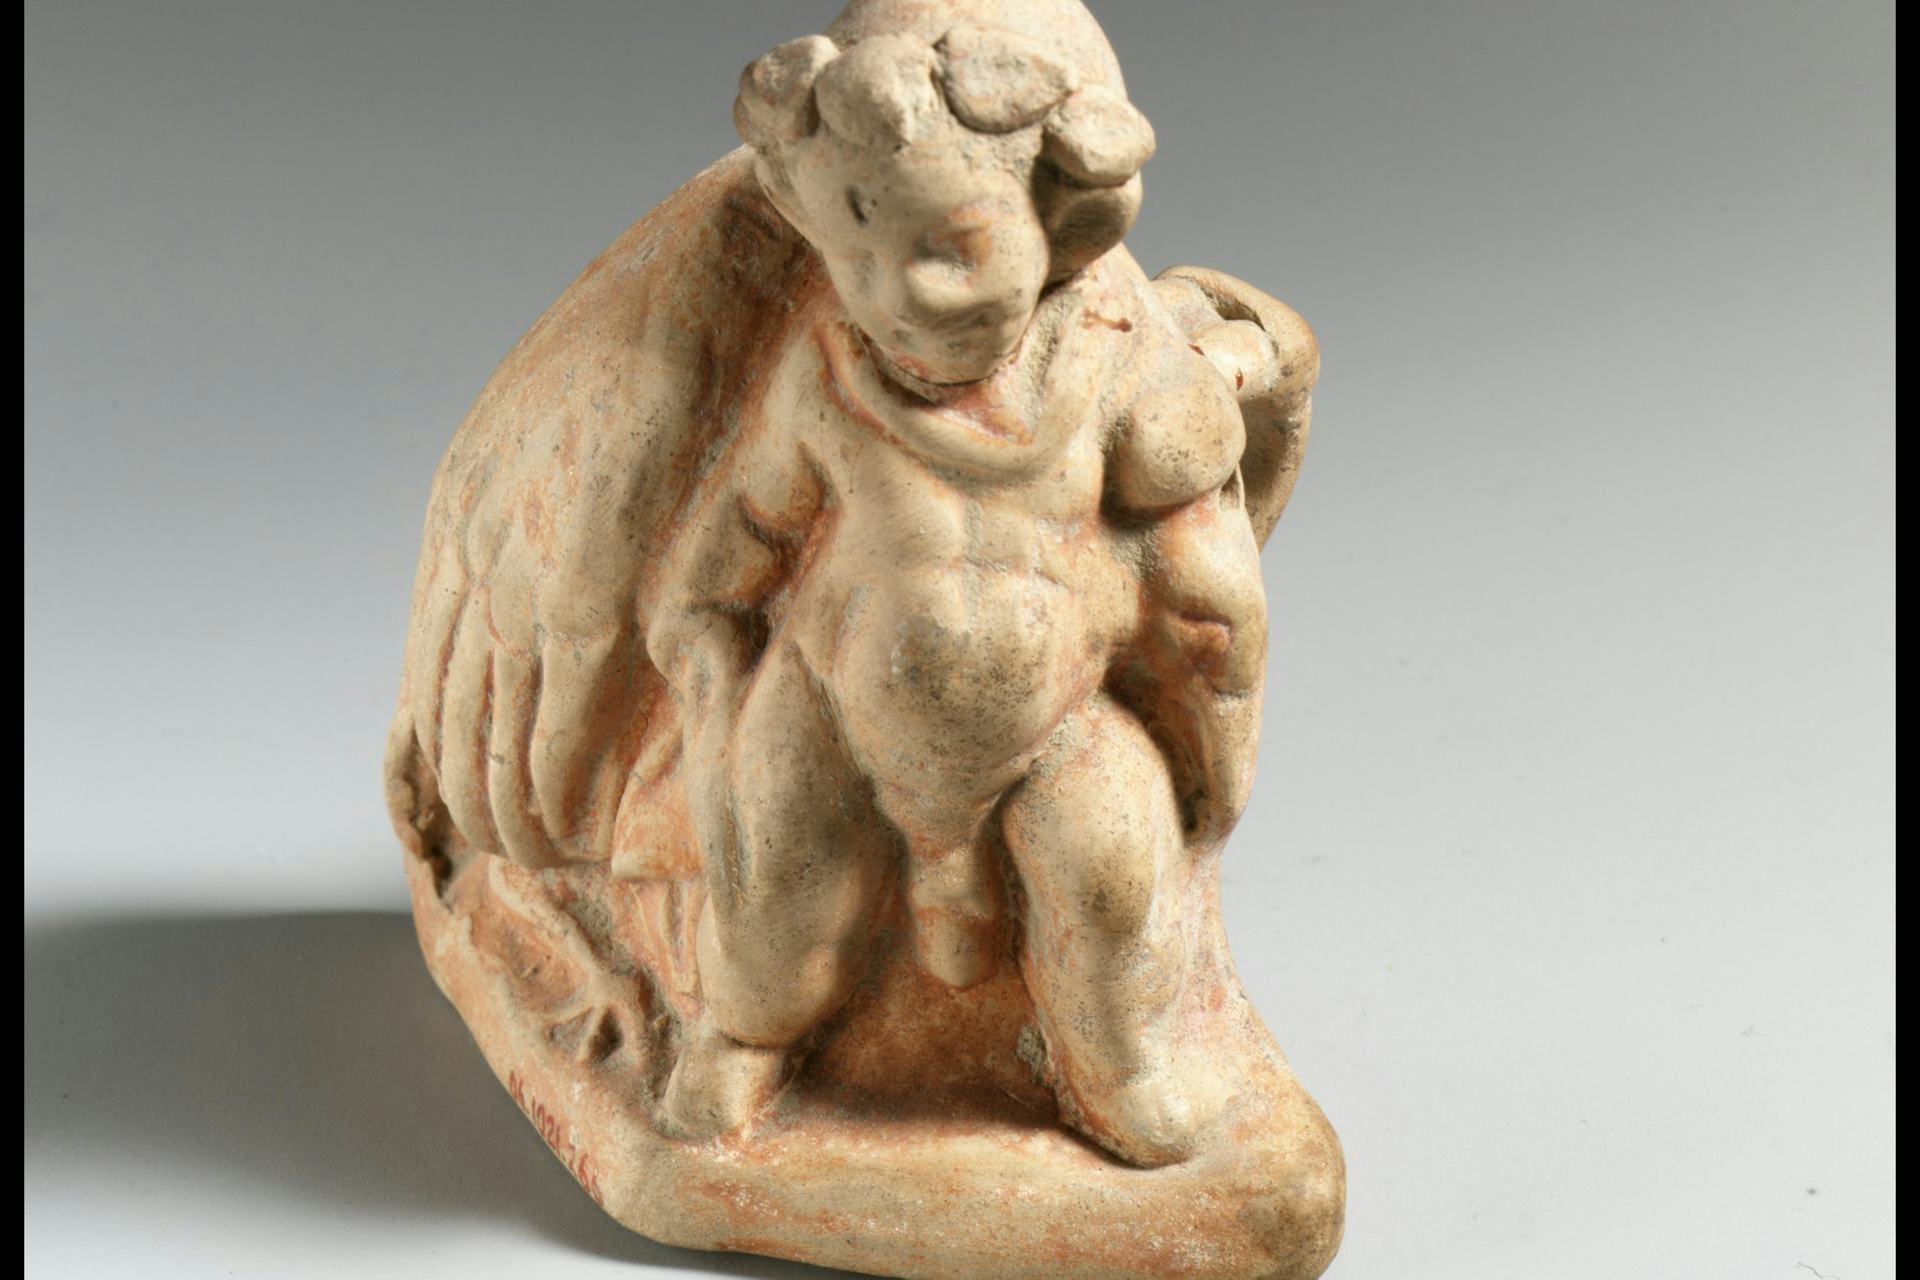 Terracotta vase in the form of a pygmy carrying a dead crane